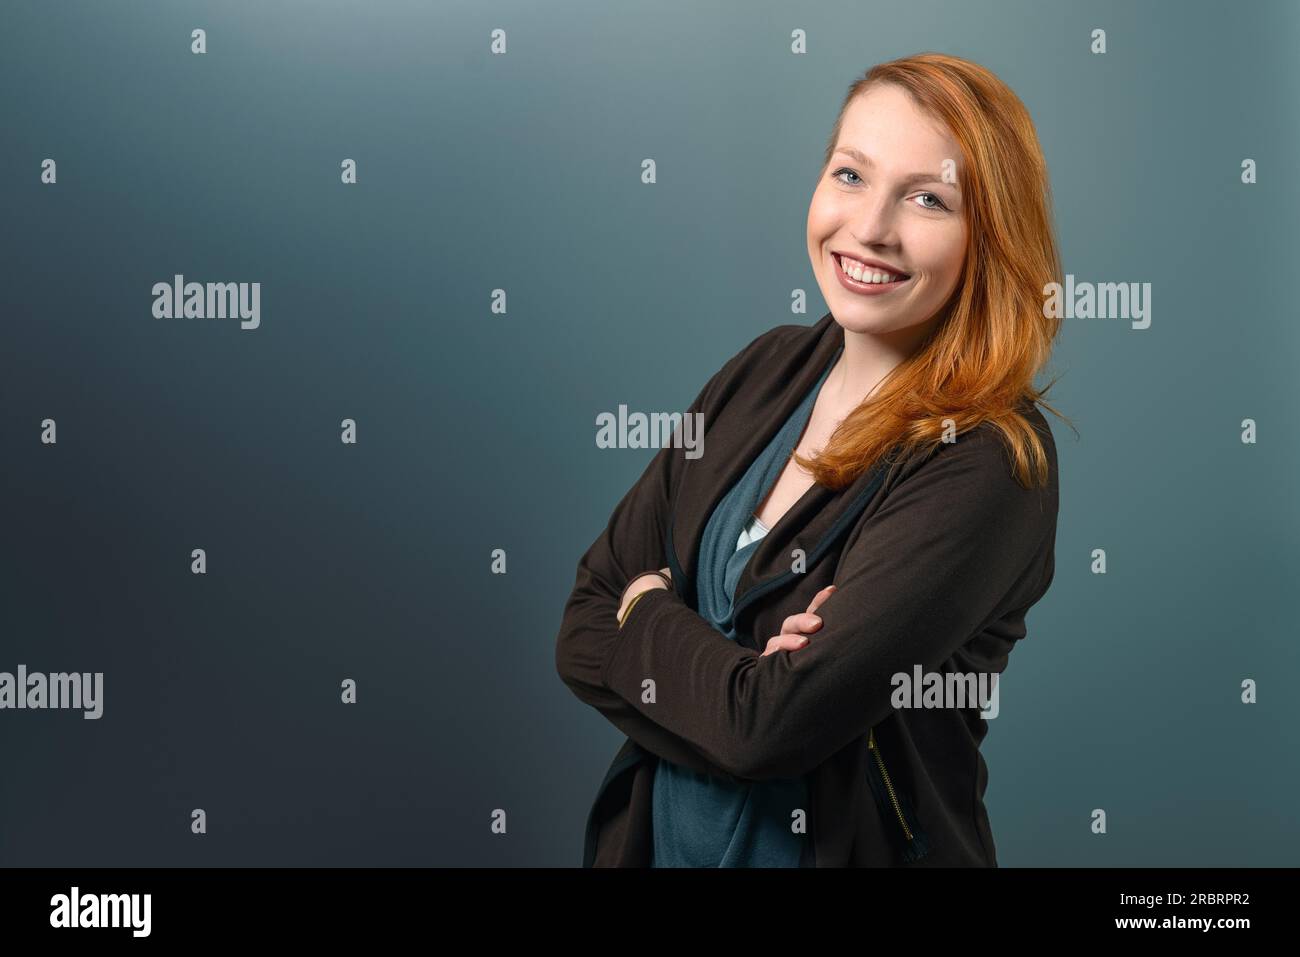 Portrait of Smiling Confident Red Haired Woman Casually Dressed with Arms Crossed in Studio with Grey Background Stock Photo